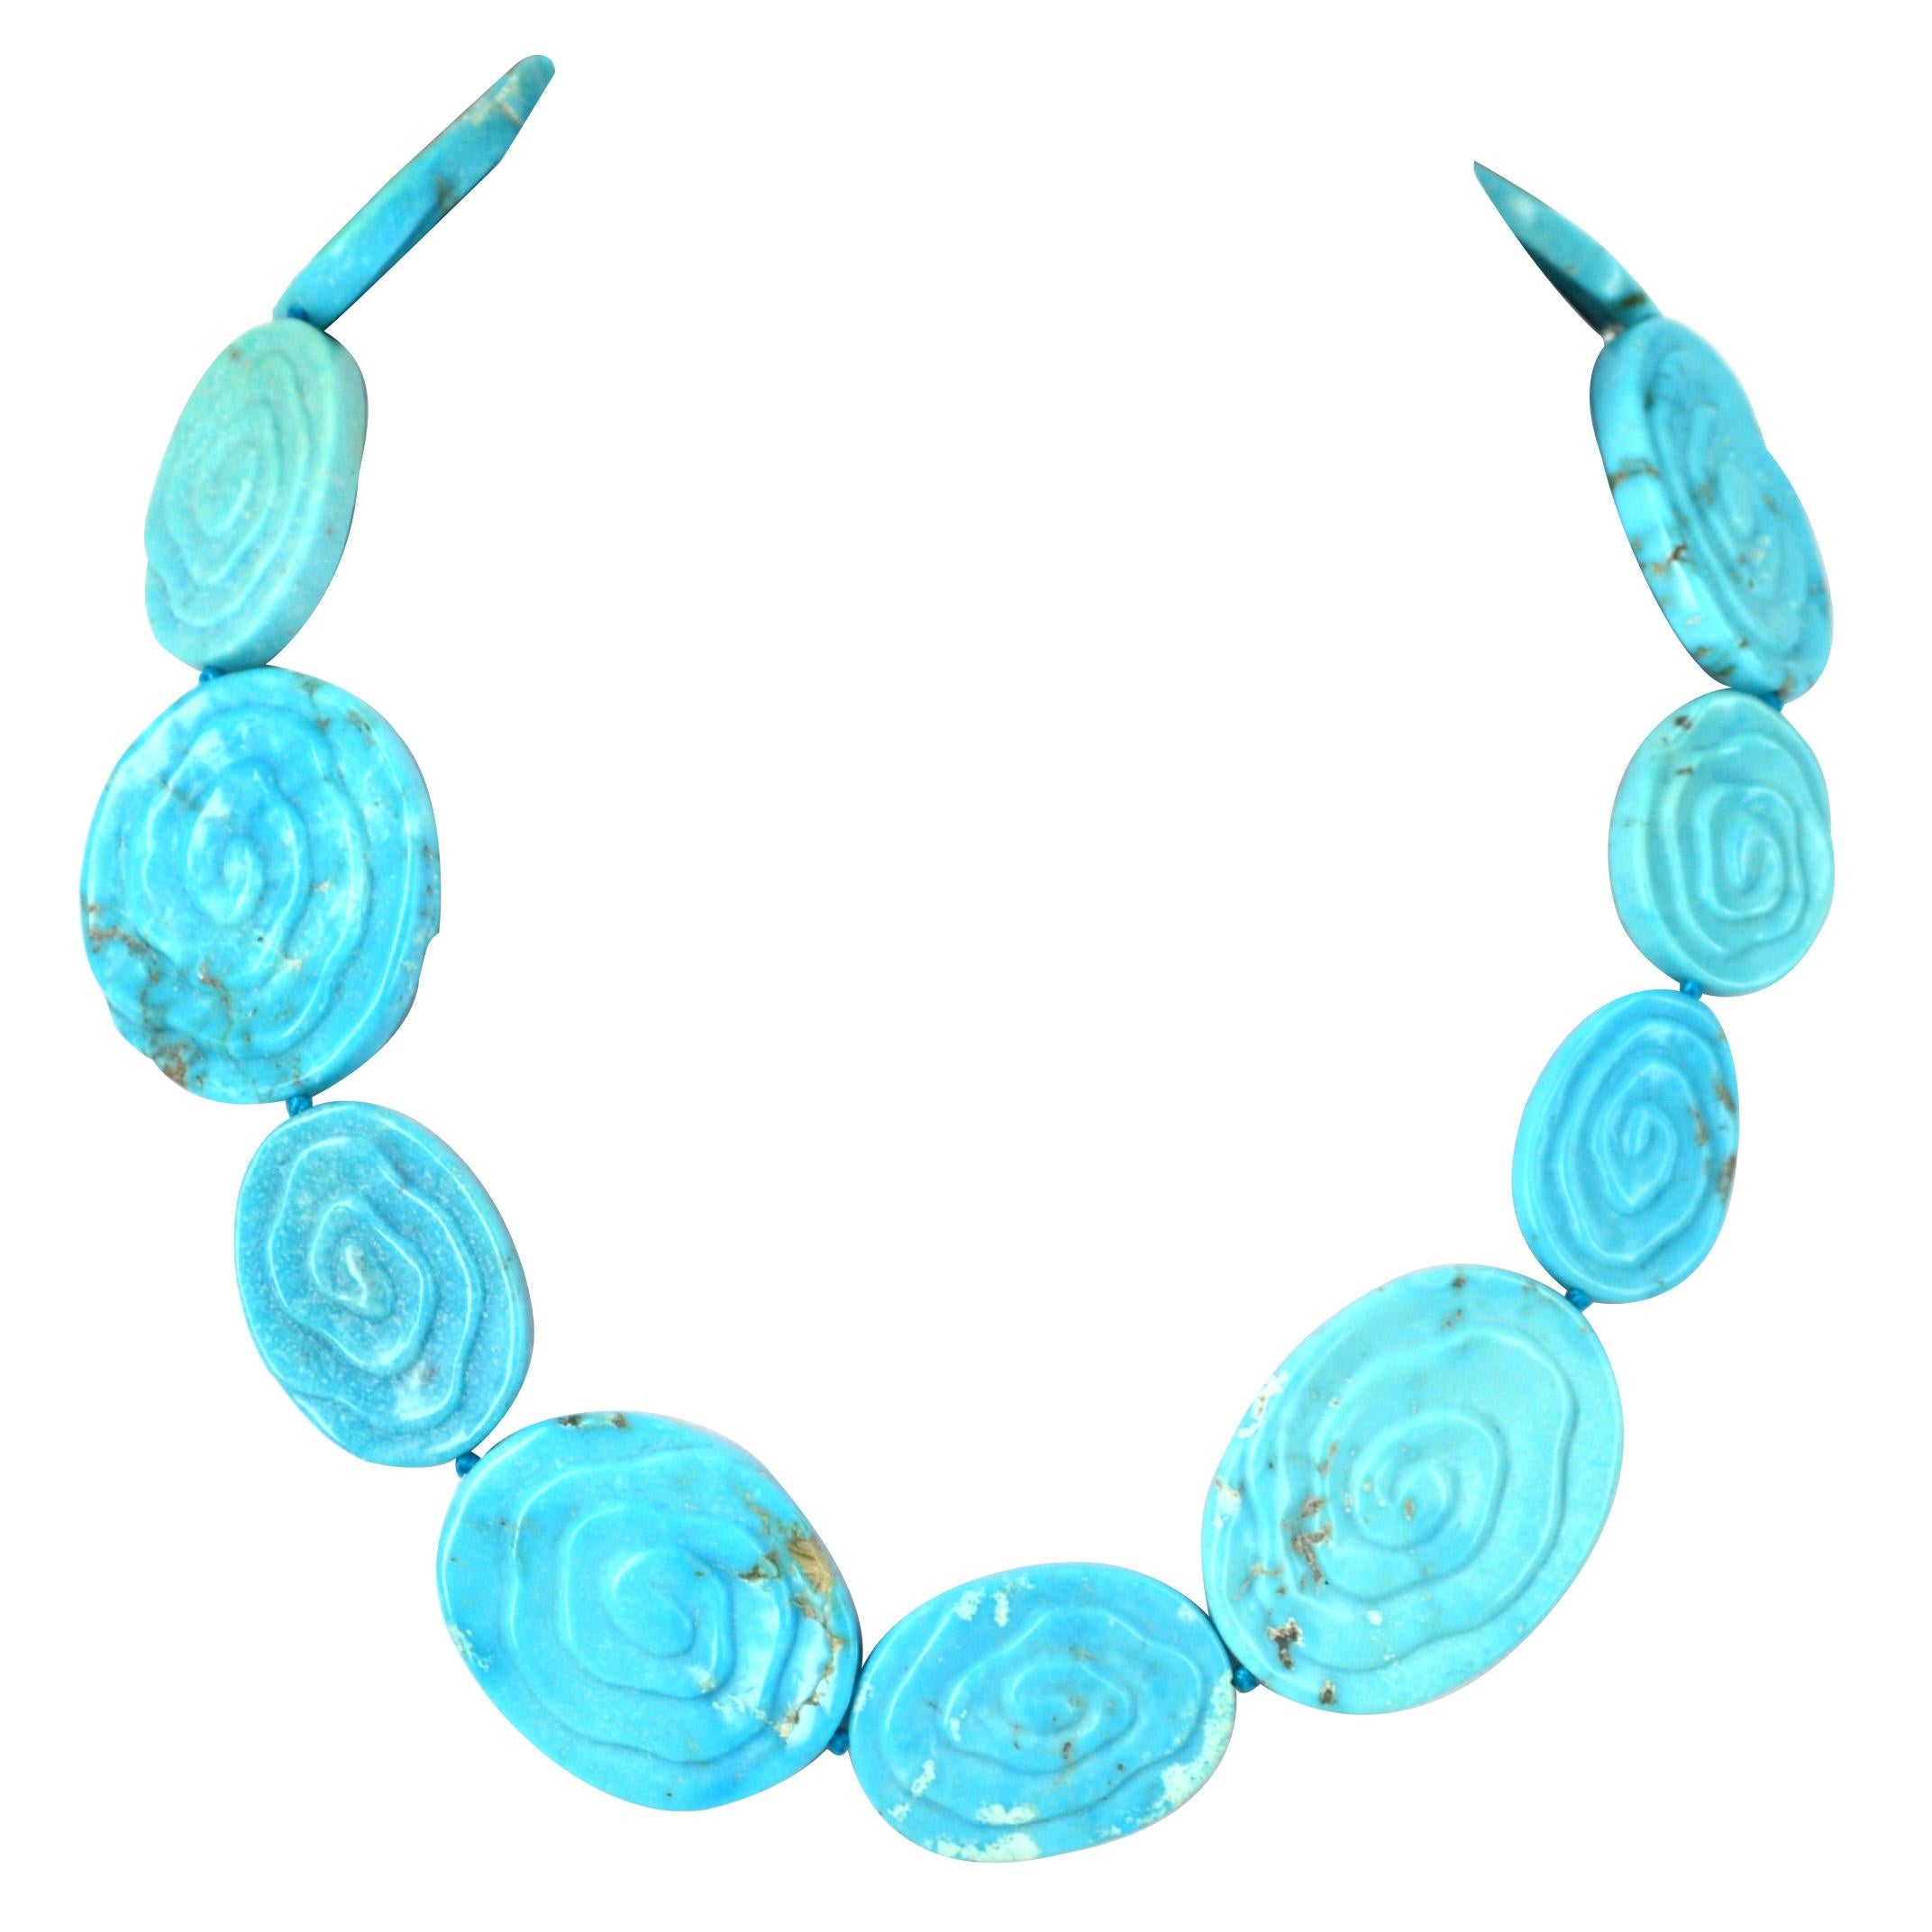 Unique carved Chinese Turquoise bead necklace, beads range from 19x27mm up to 40x30mm, hand knotted Sterling Silver hook clasp 
Total length of necklace 47.5cm.

